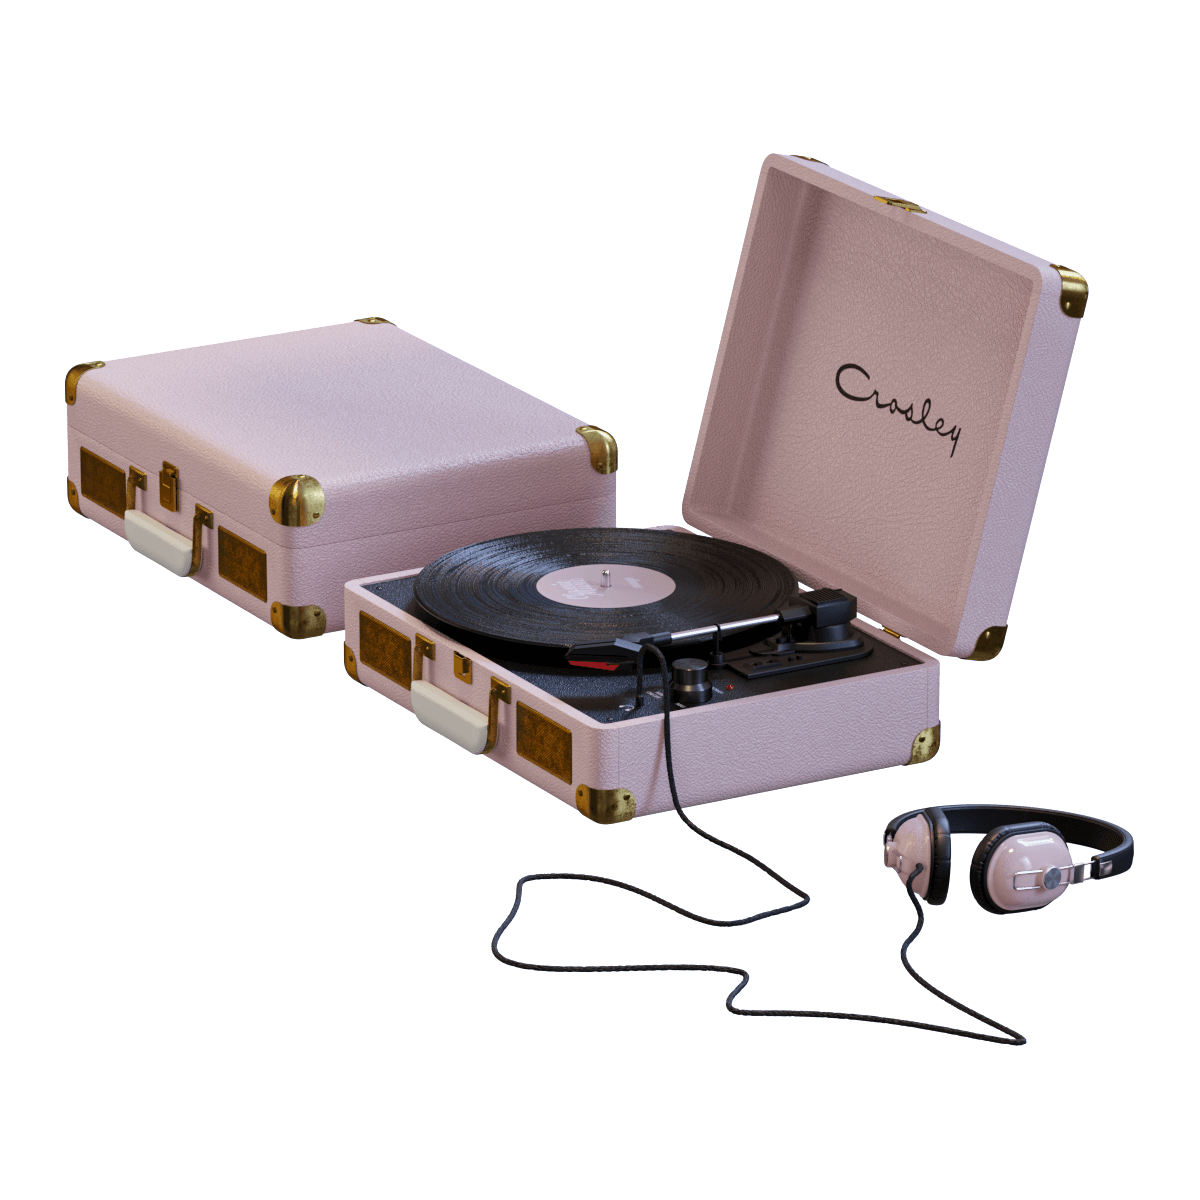 Pink Crosley portable record player - download 3d model 